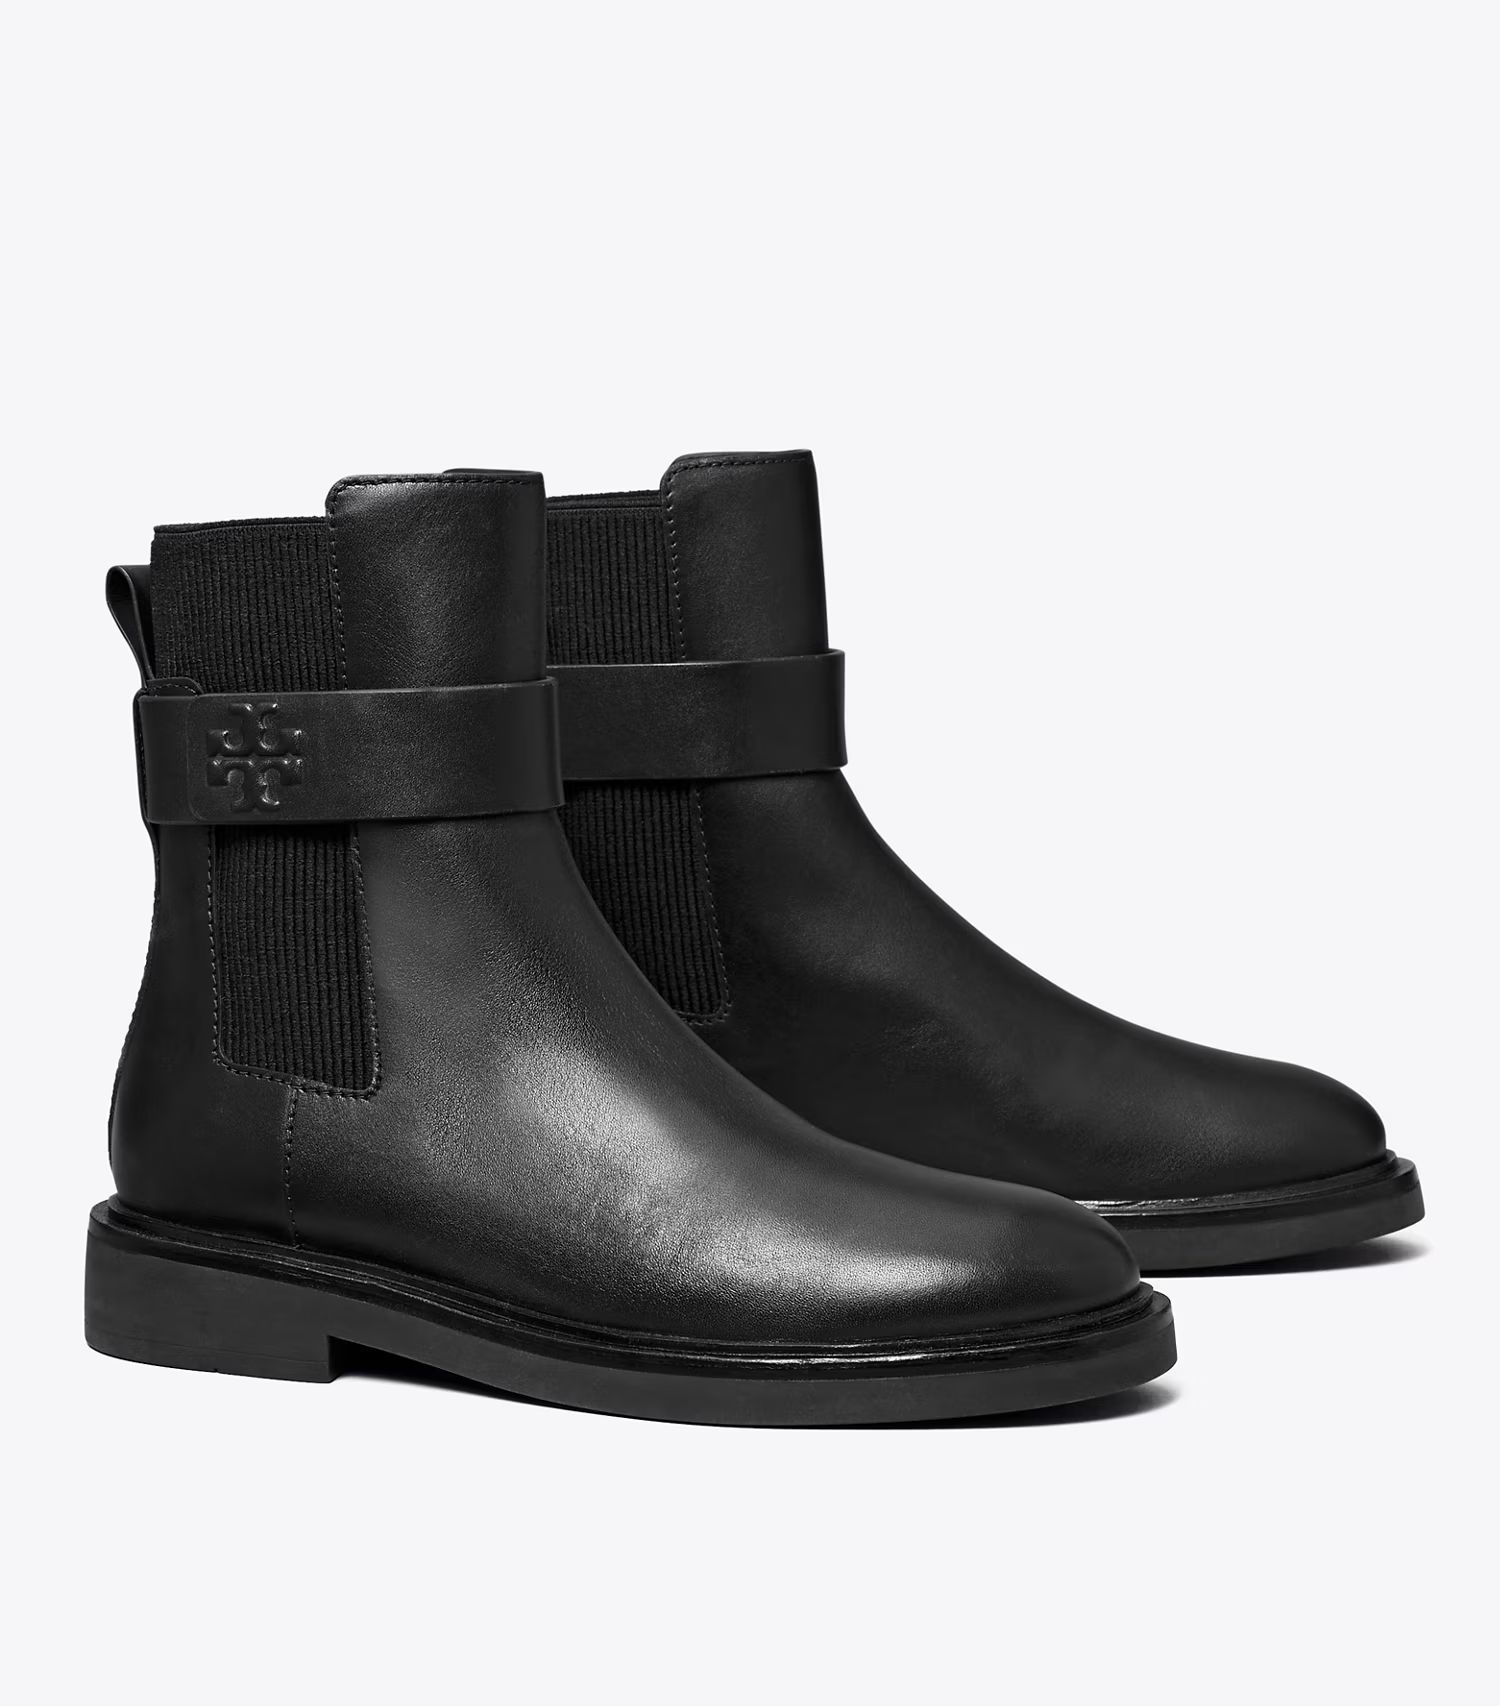 Double T Chelsea Boot: Women's Designer Ankle Boots | Tory Burch | Tory Burch (US)